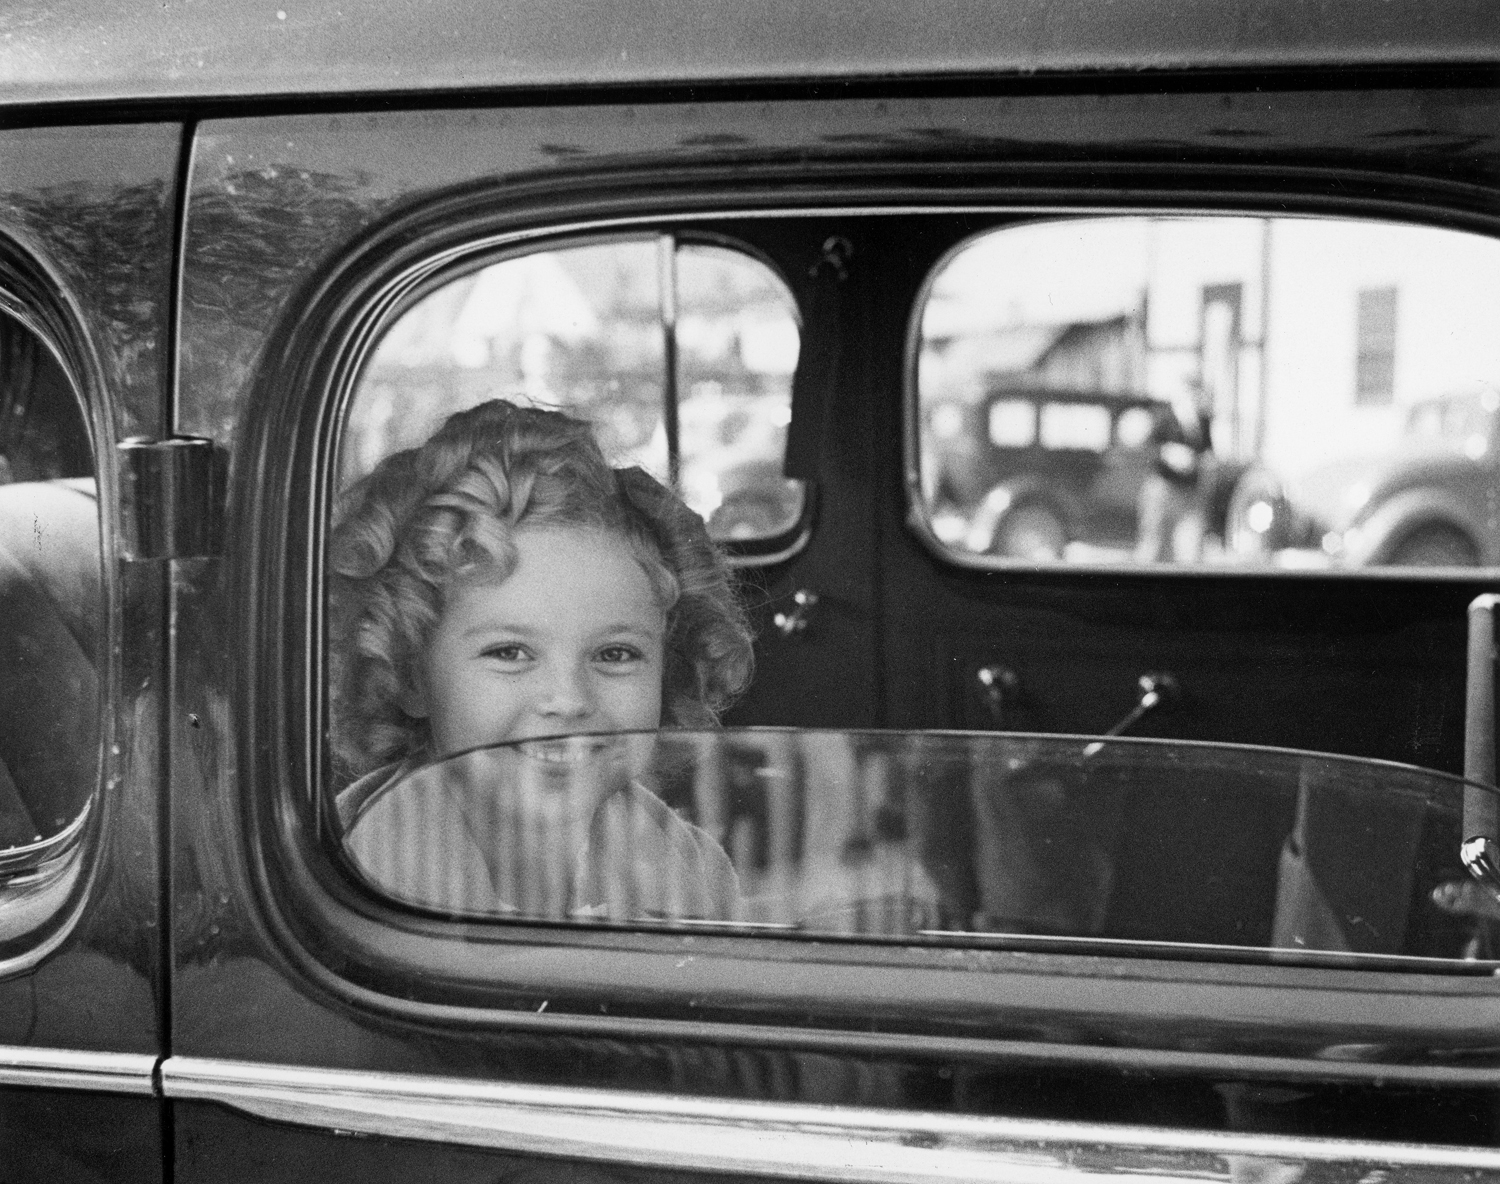 Shirley Temple arrives at the 20th Century Fox studio to celebrate her eighth birthday, 1936.